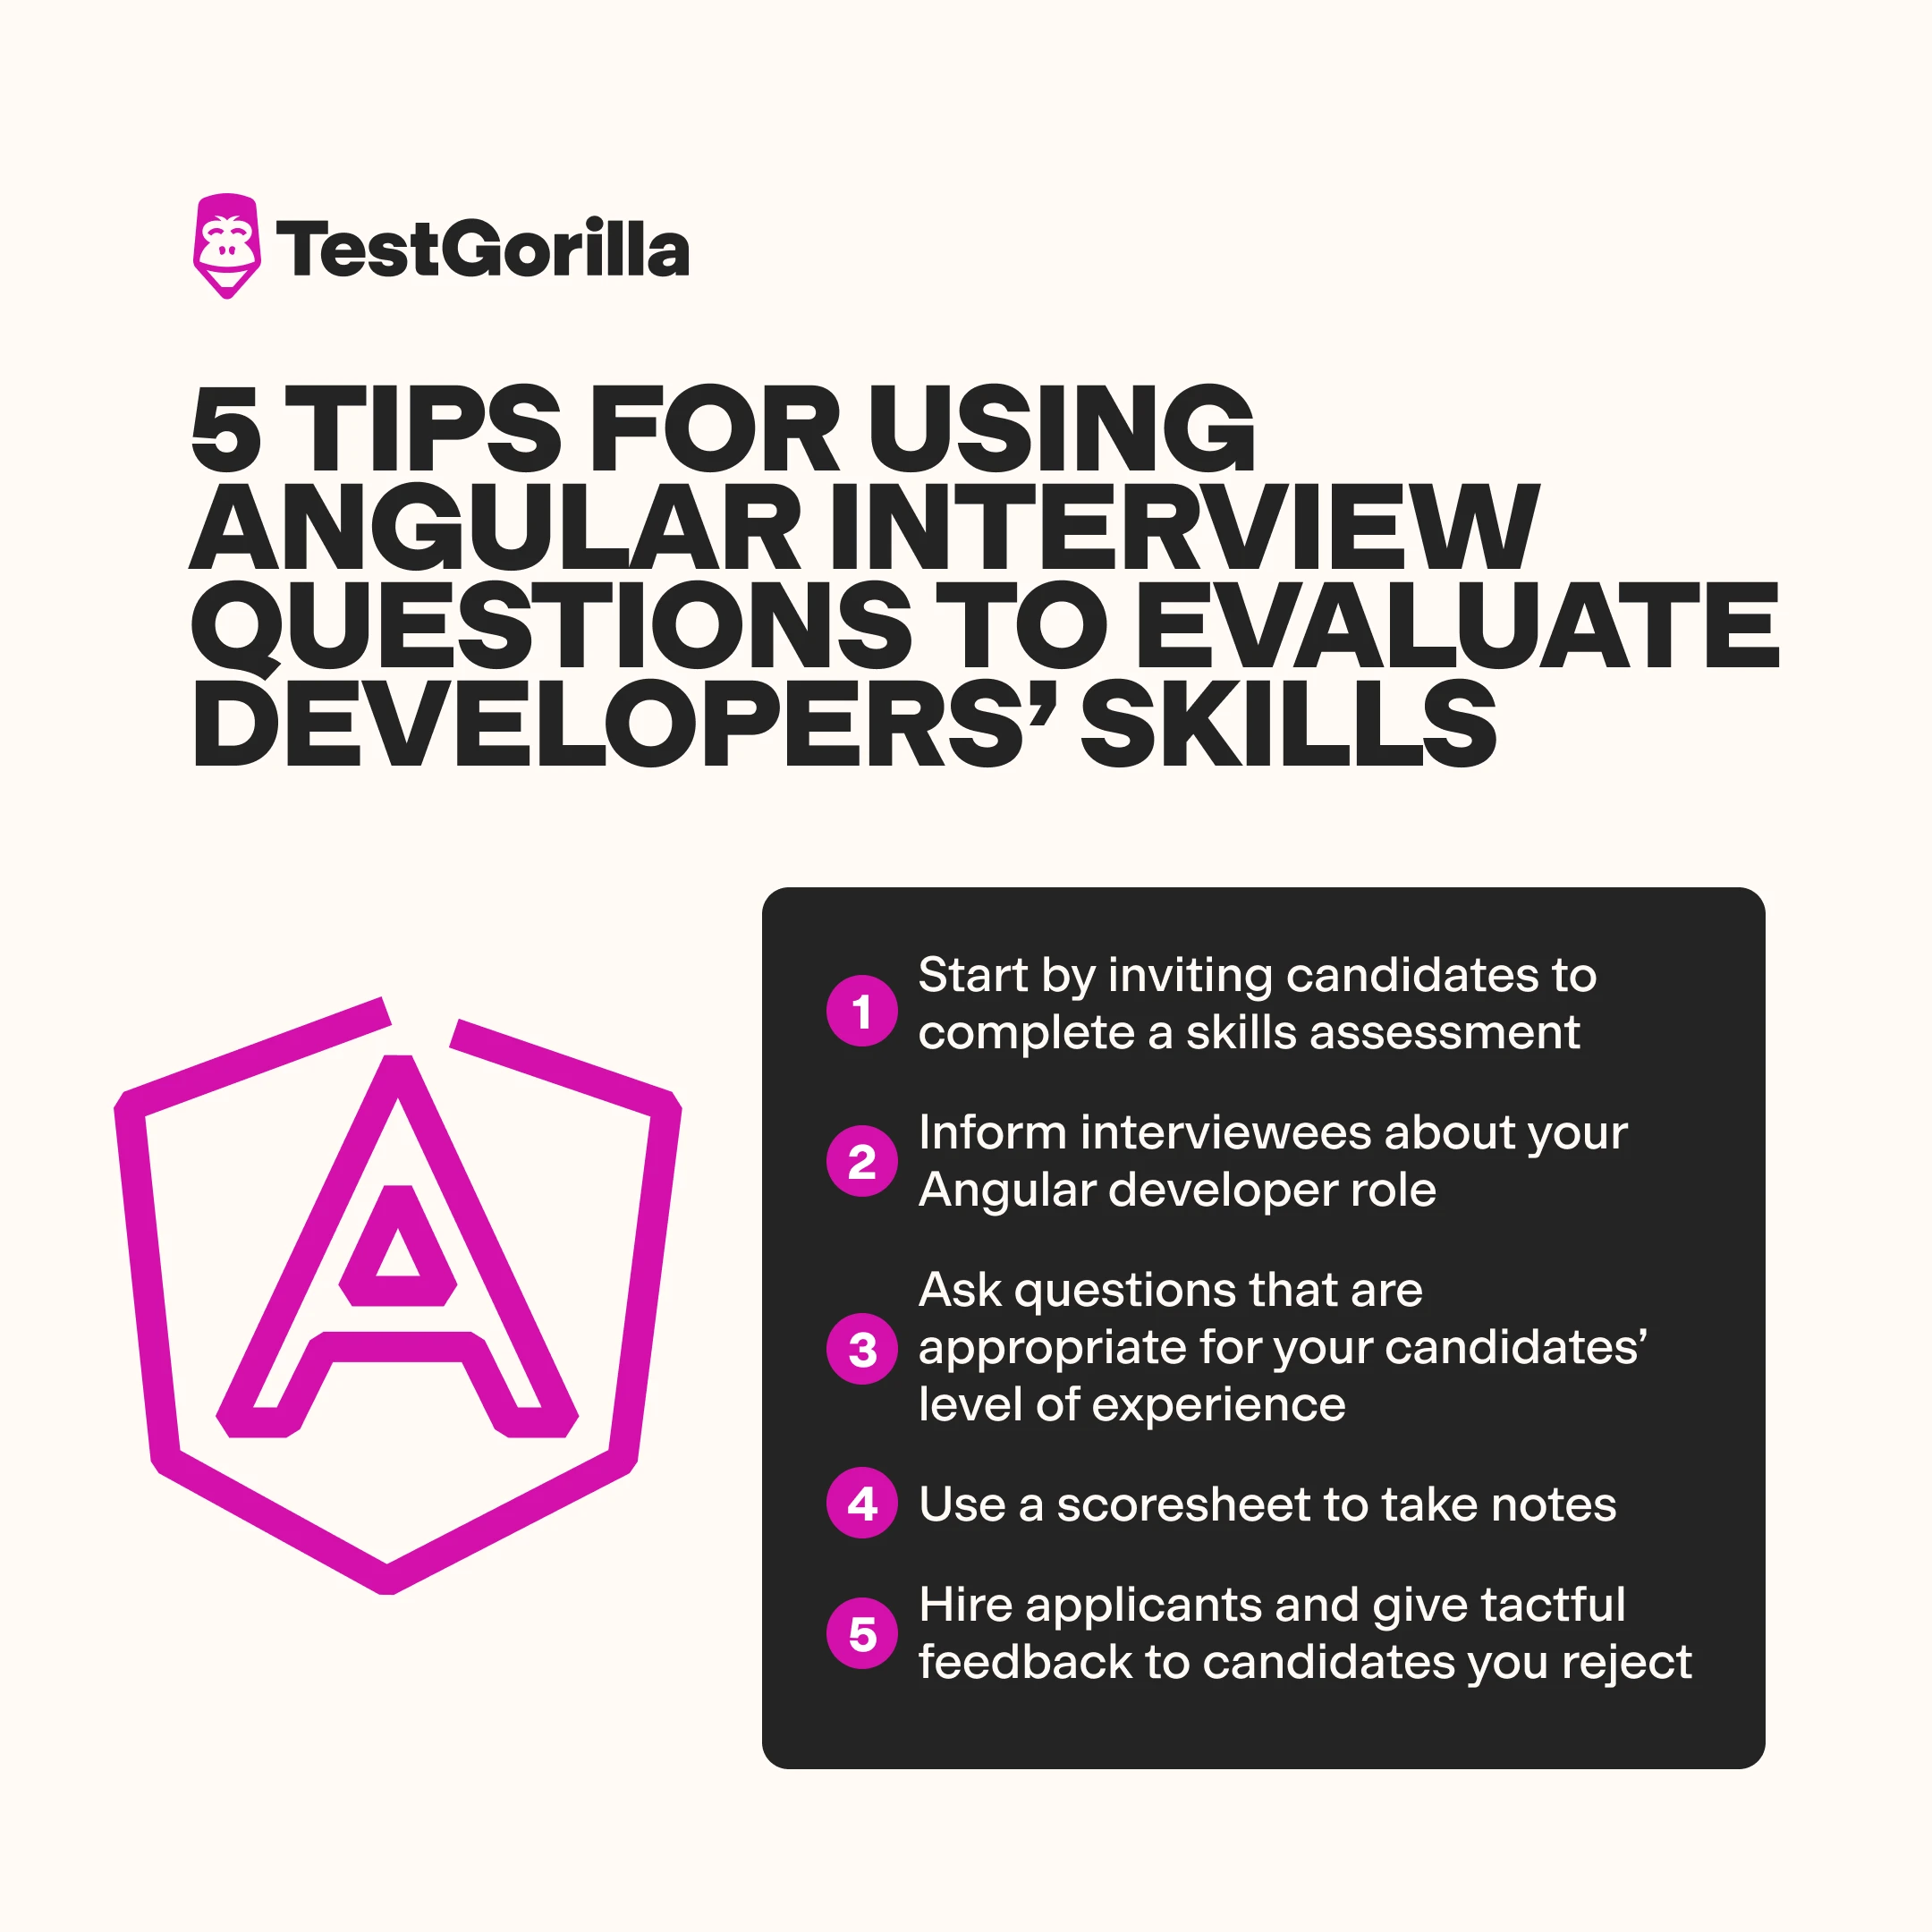 5 tips for using Angular interview questions to evaluate developers’ skills